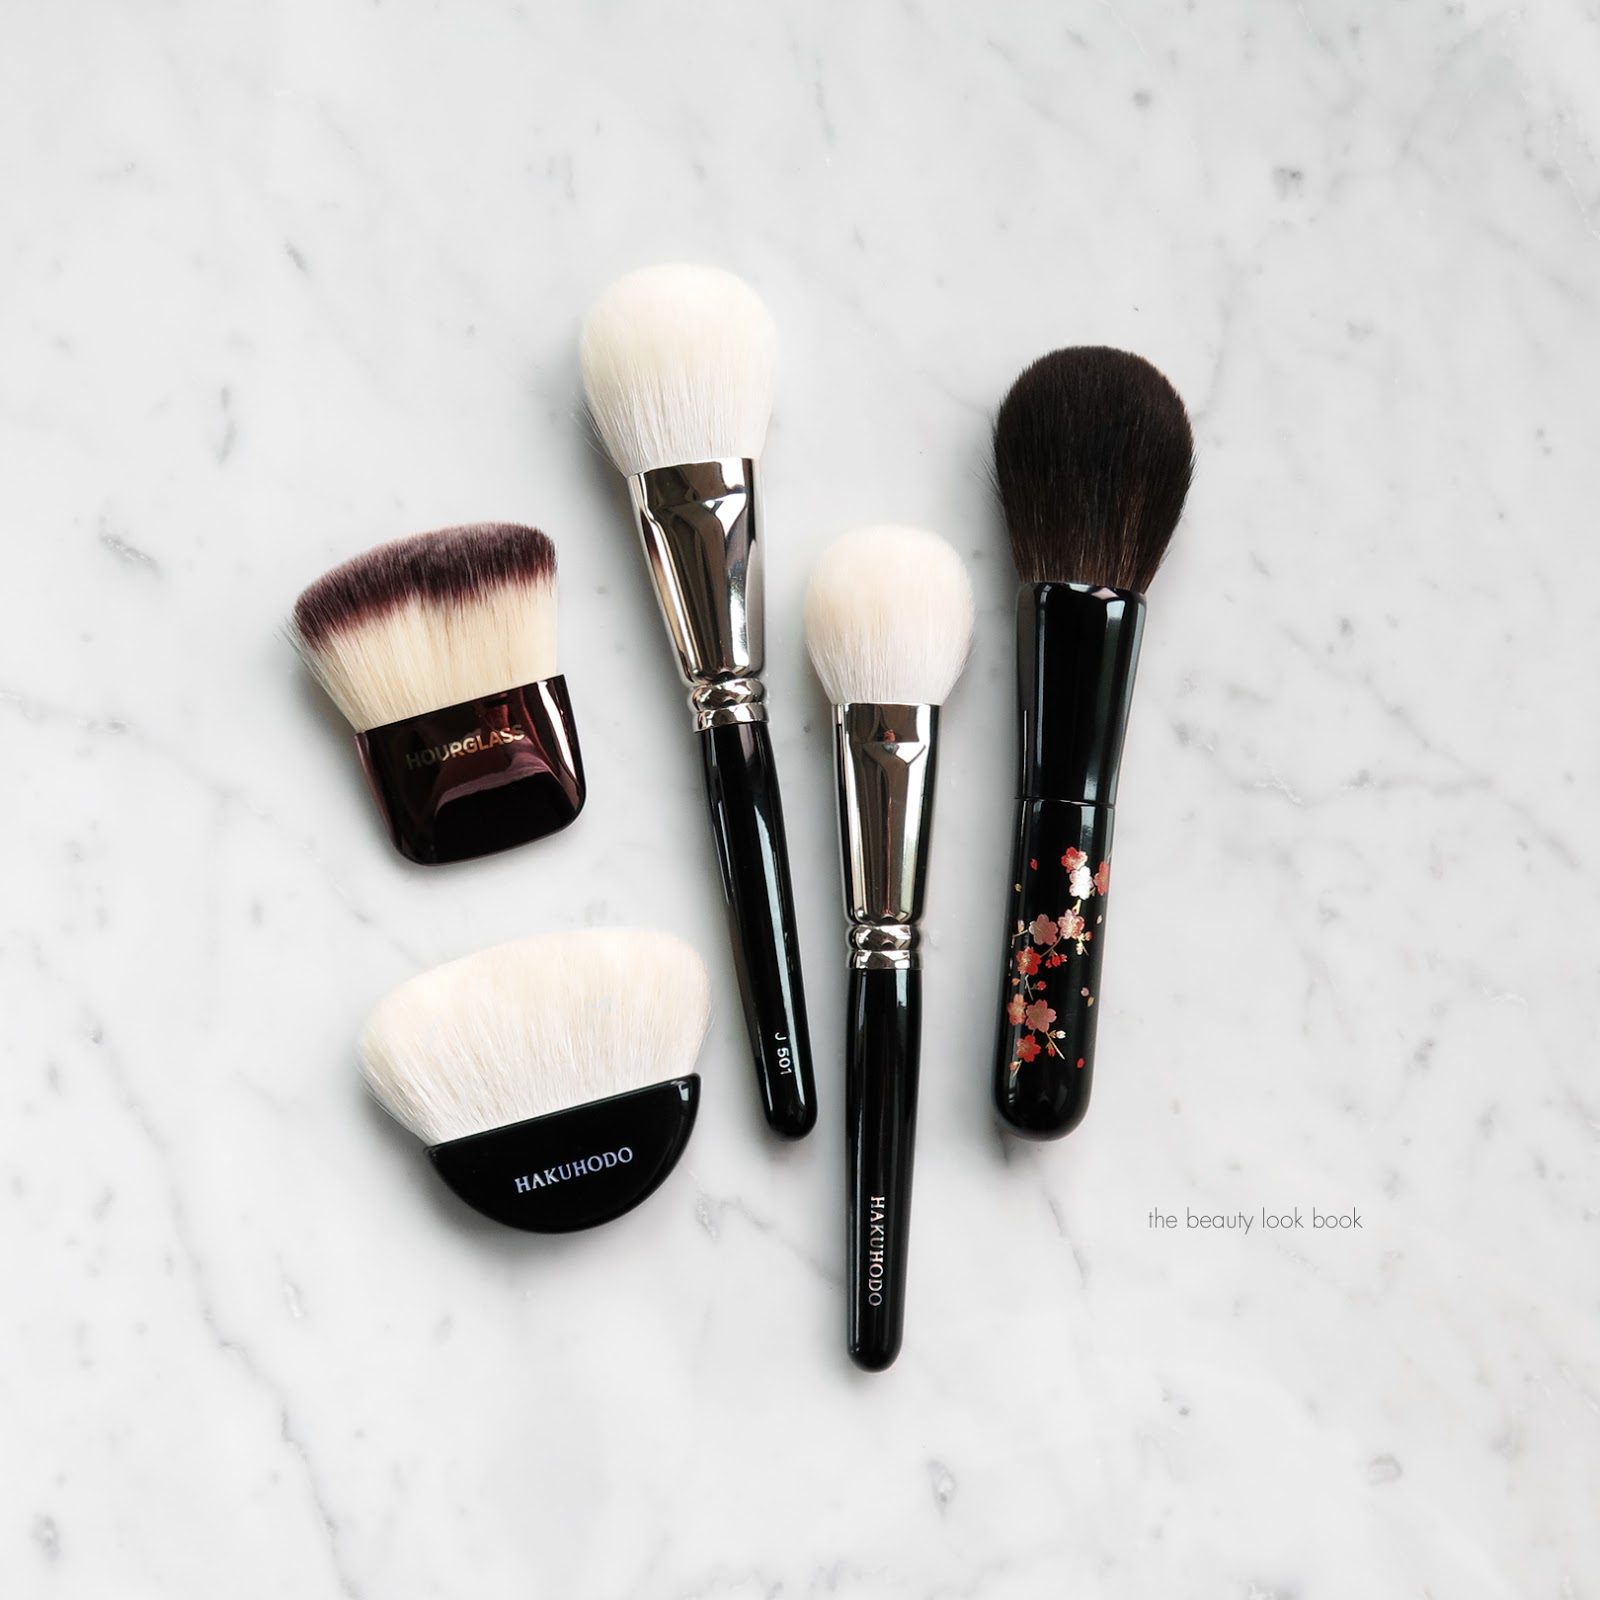 Makeup Brushes Archives - Page 2 of 5 - The Beauty Look Book